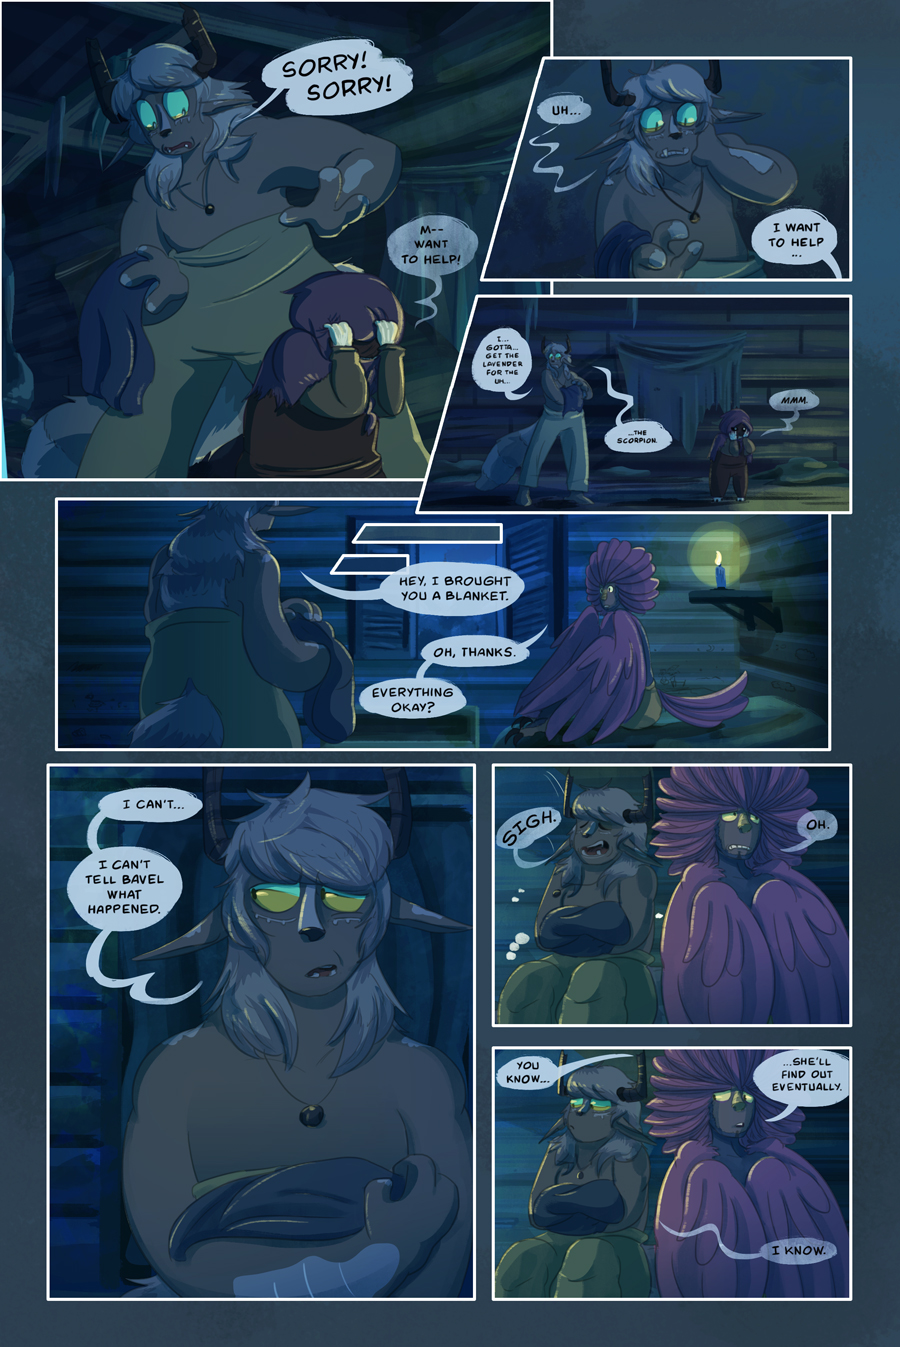 Chapter 6, page 15